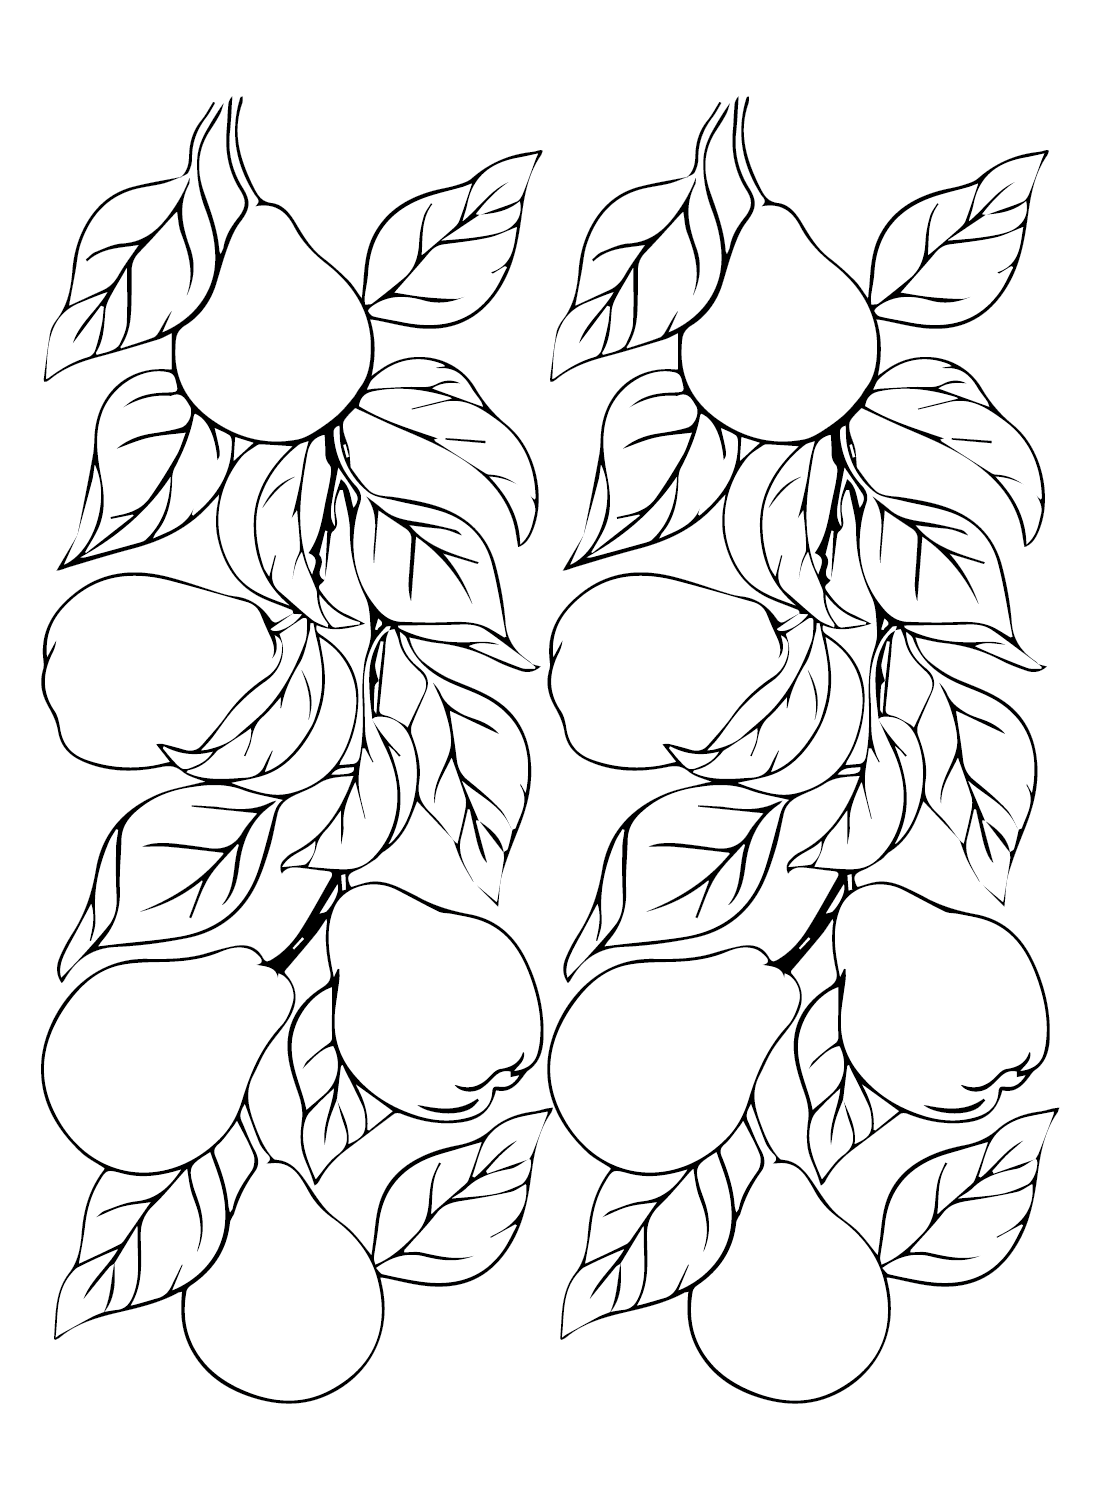 Pattern Pears from Pears